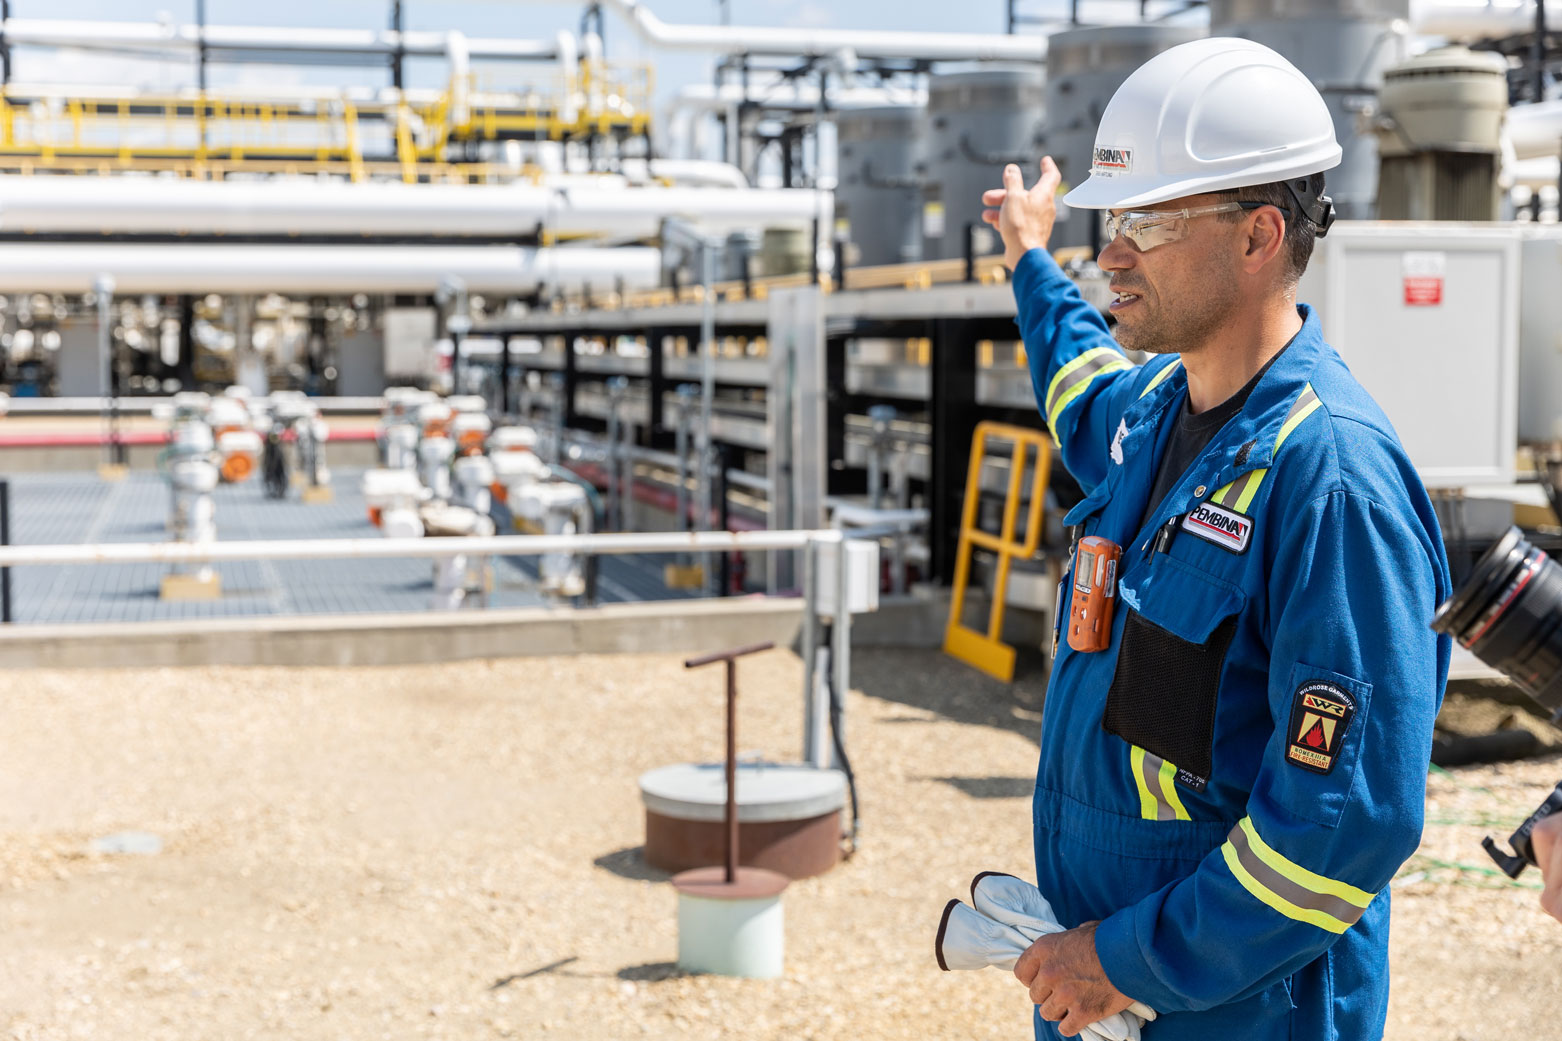 A refinery supervisor points toward processing piping and equipment.